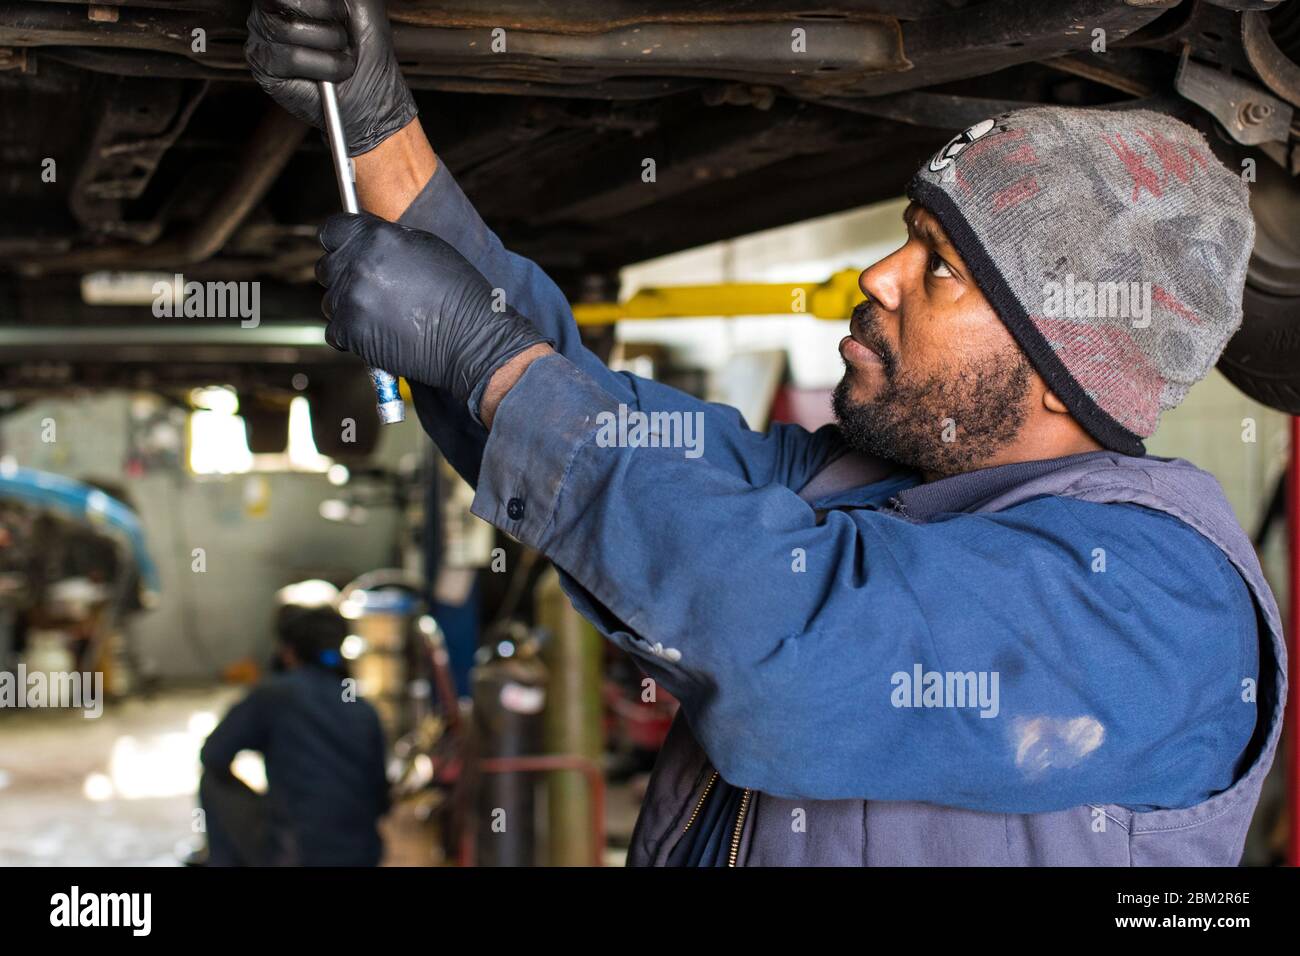 May 5, 2020: May 05, 2020: RESTEM MOHAMMED services a car in his auto repair  shop in Scarborough, Toronto. Auto mechanic shops for vehicle repair &  maintenance are considered essential services during